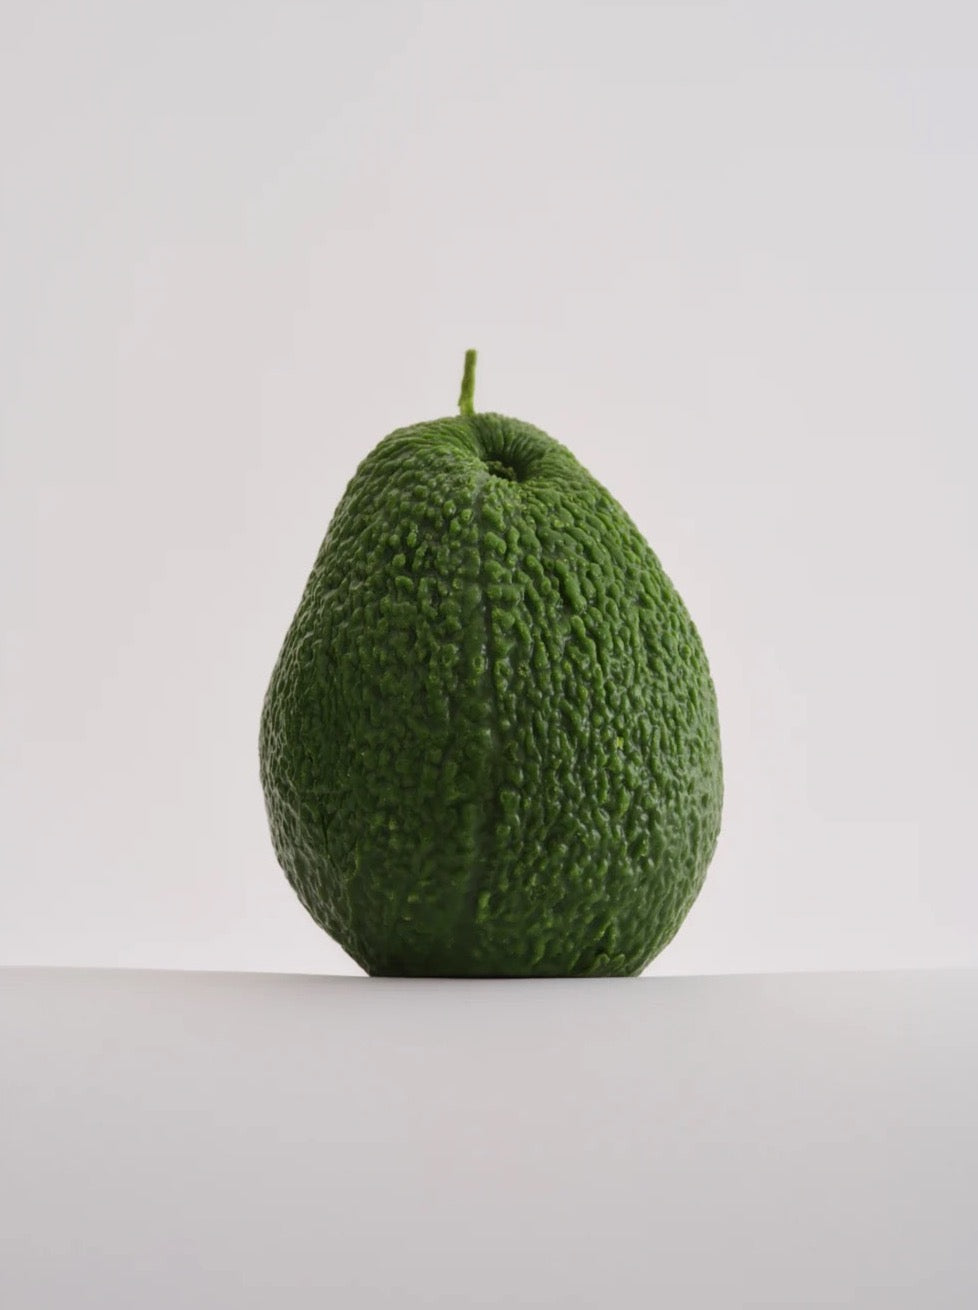 A lifelike Nonna's Grocer Avocado Candle – Large sitting on a white surface.